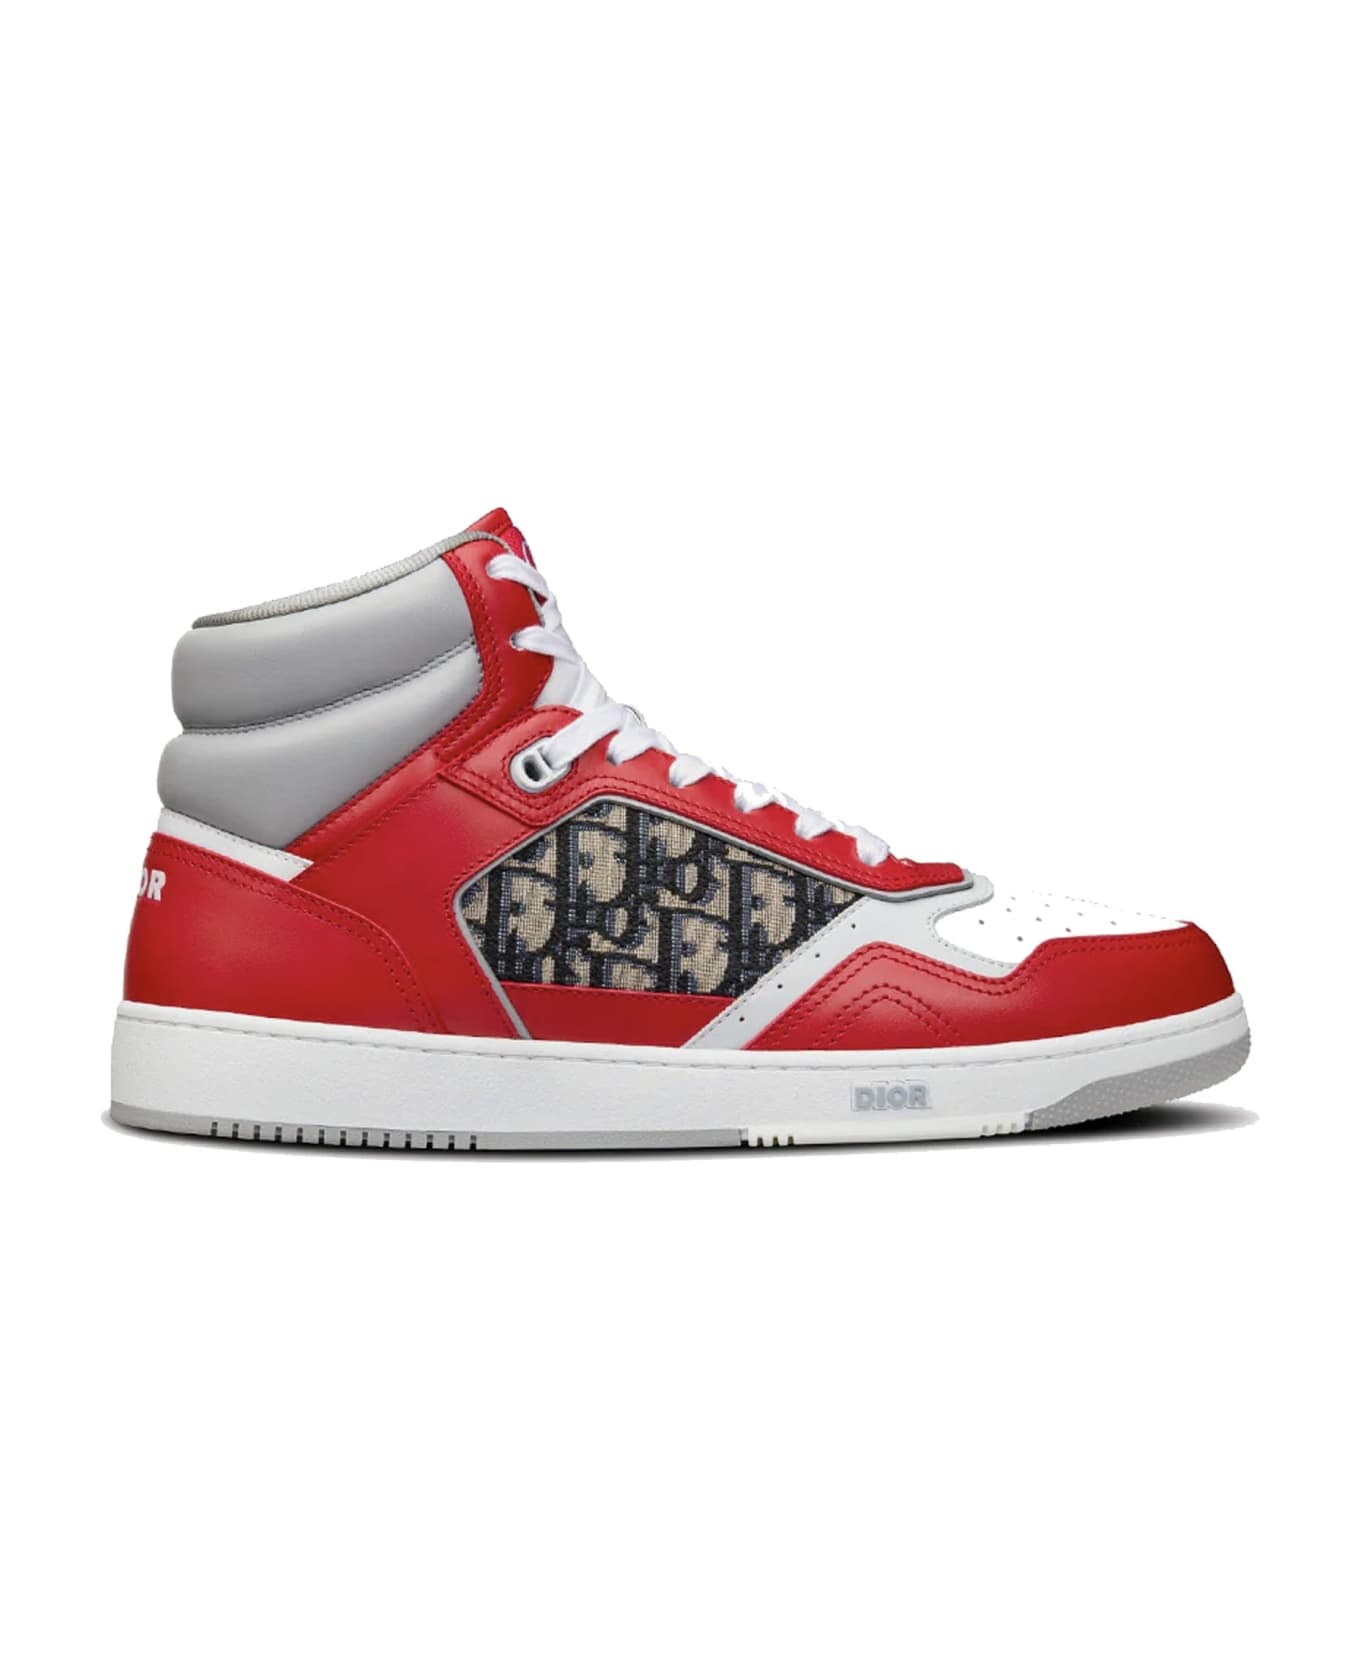 Dior Oblique High-top Sneakers - Red